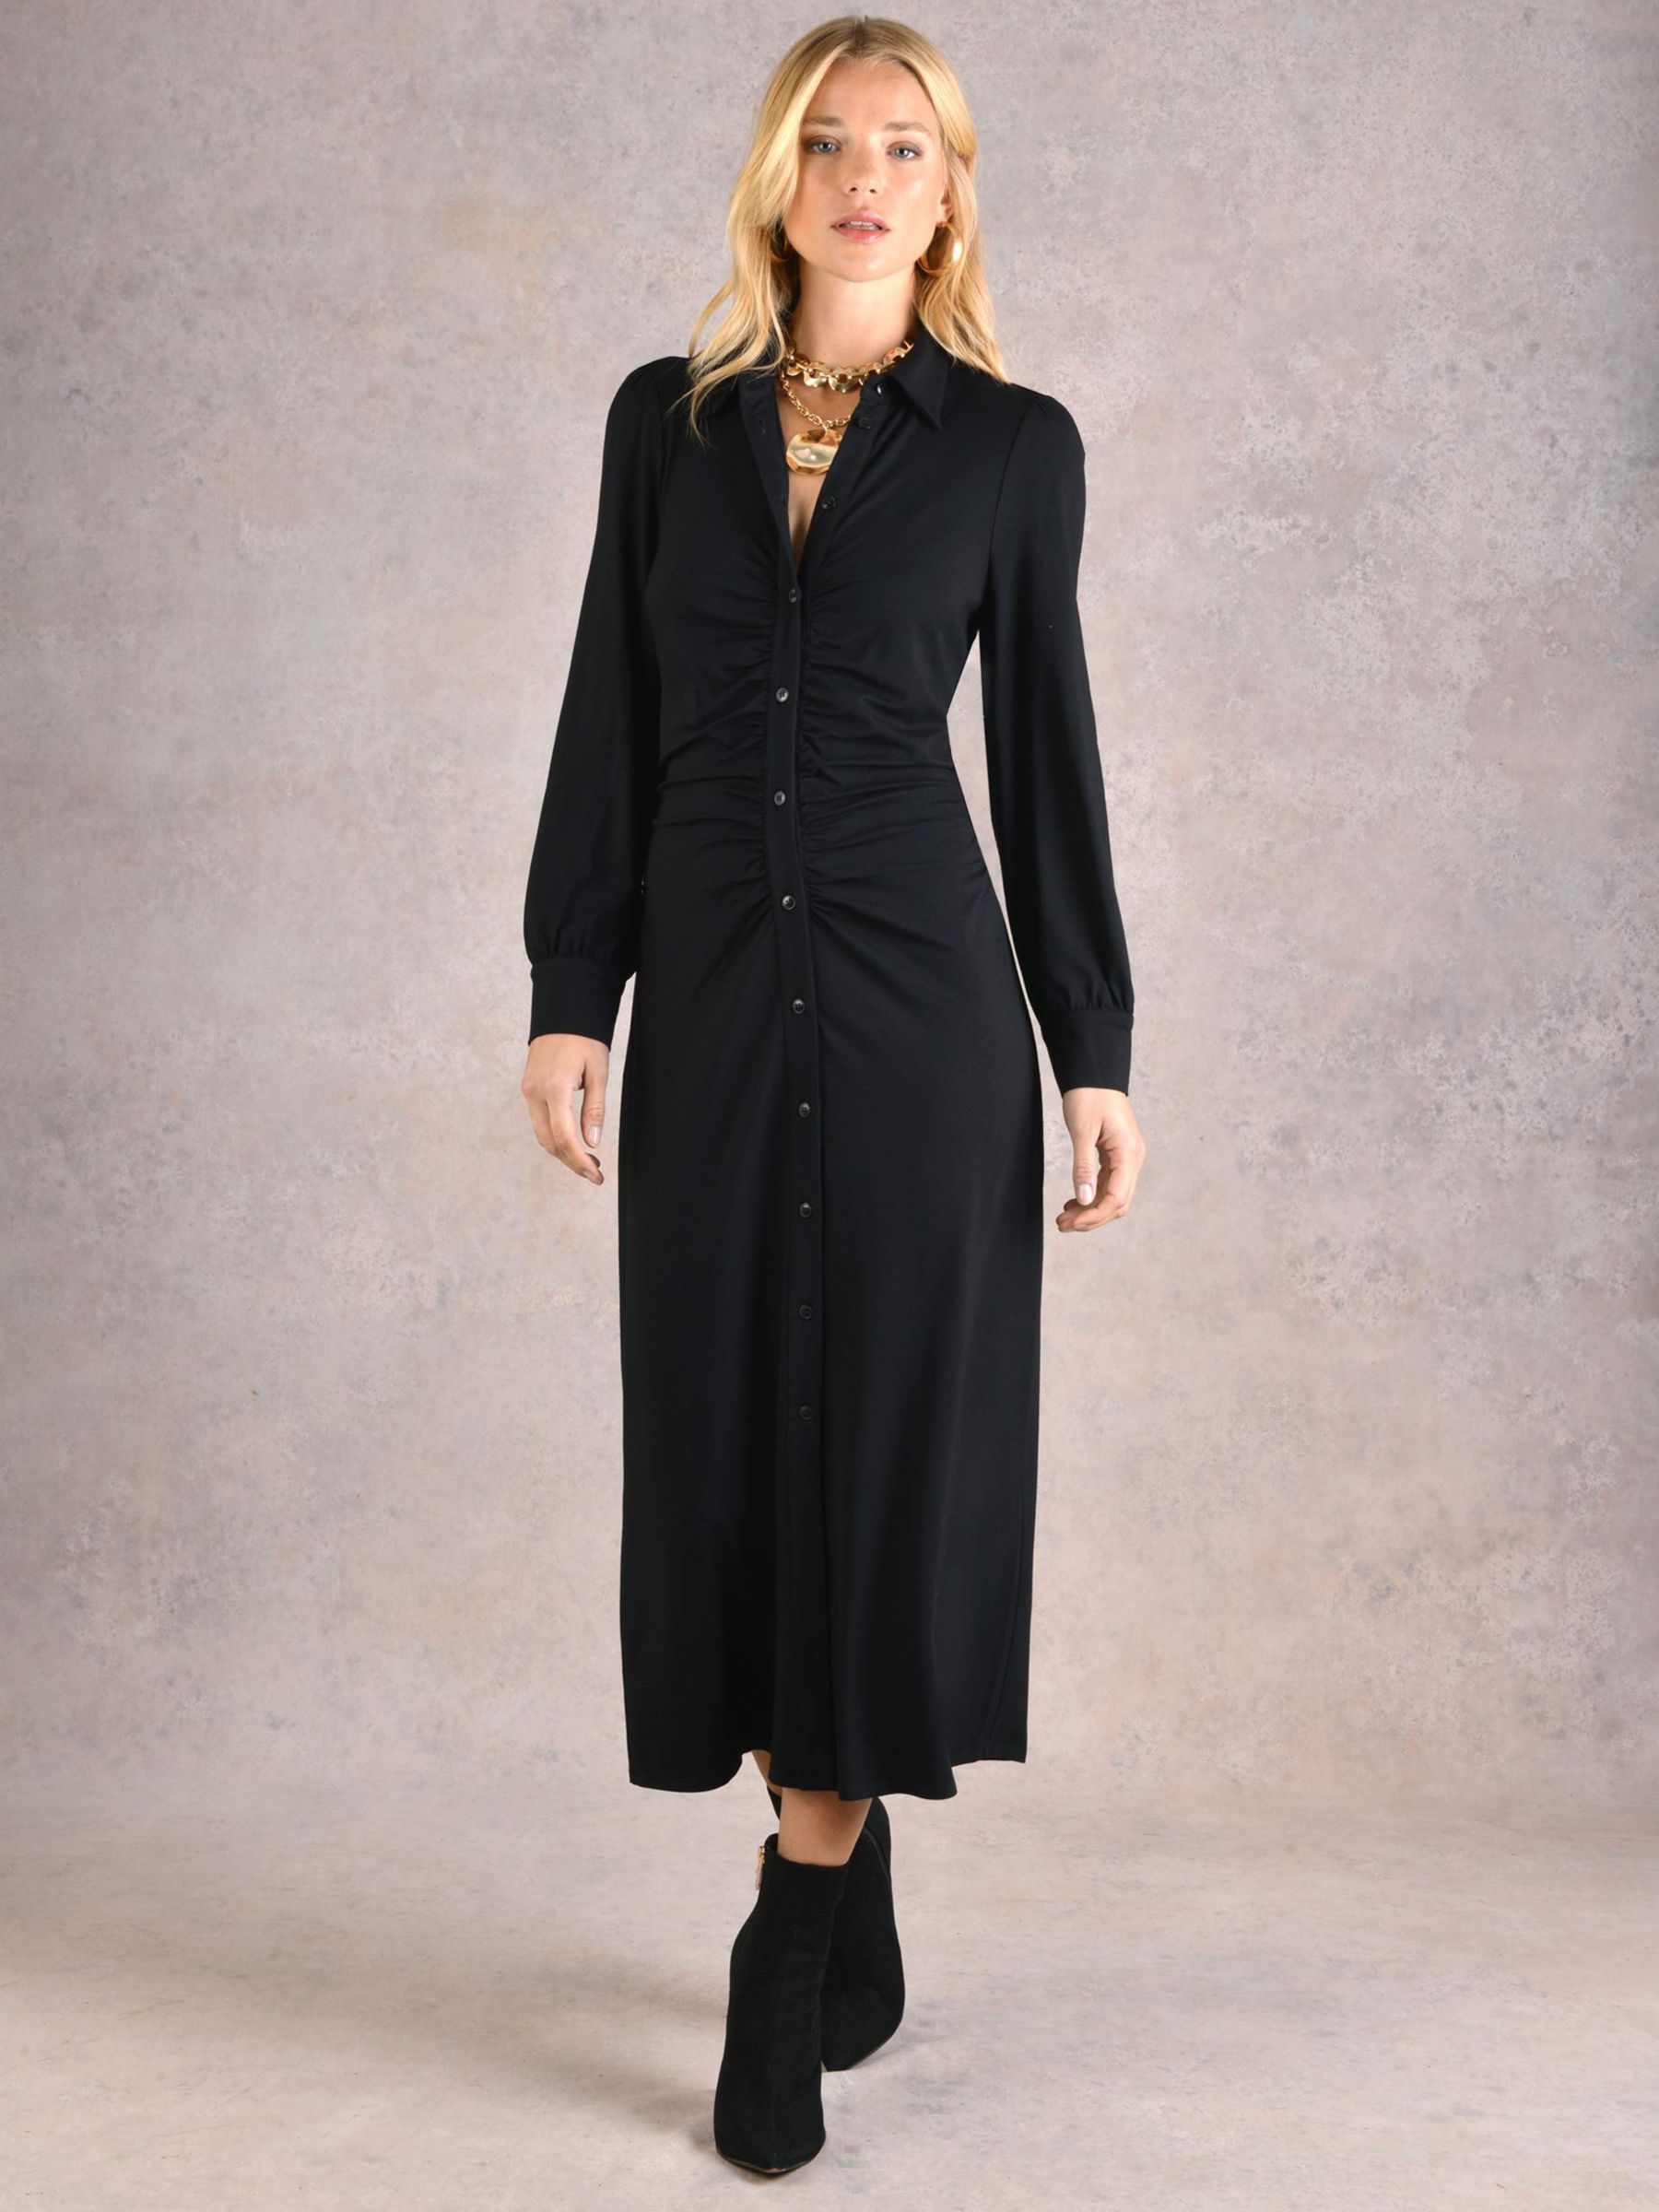 Ro&Zo Ruched Front Jersey Shirt Dress, Black at John Lewis & Partners